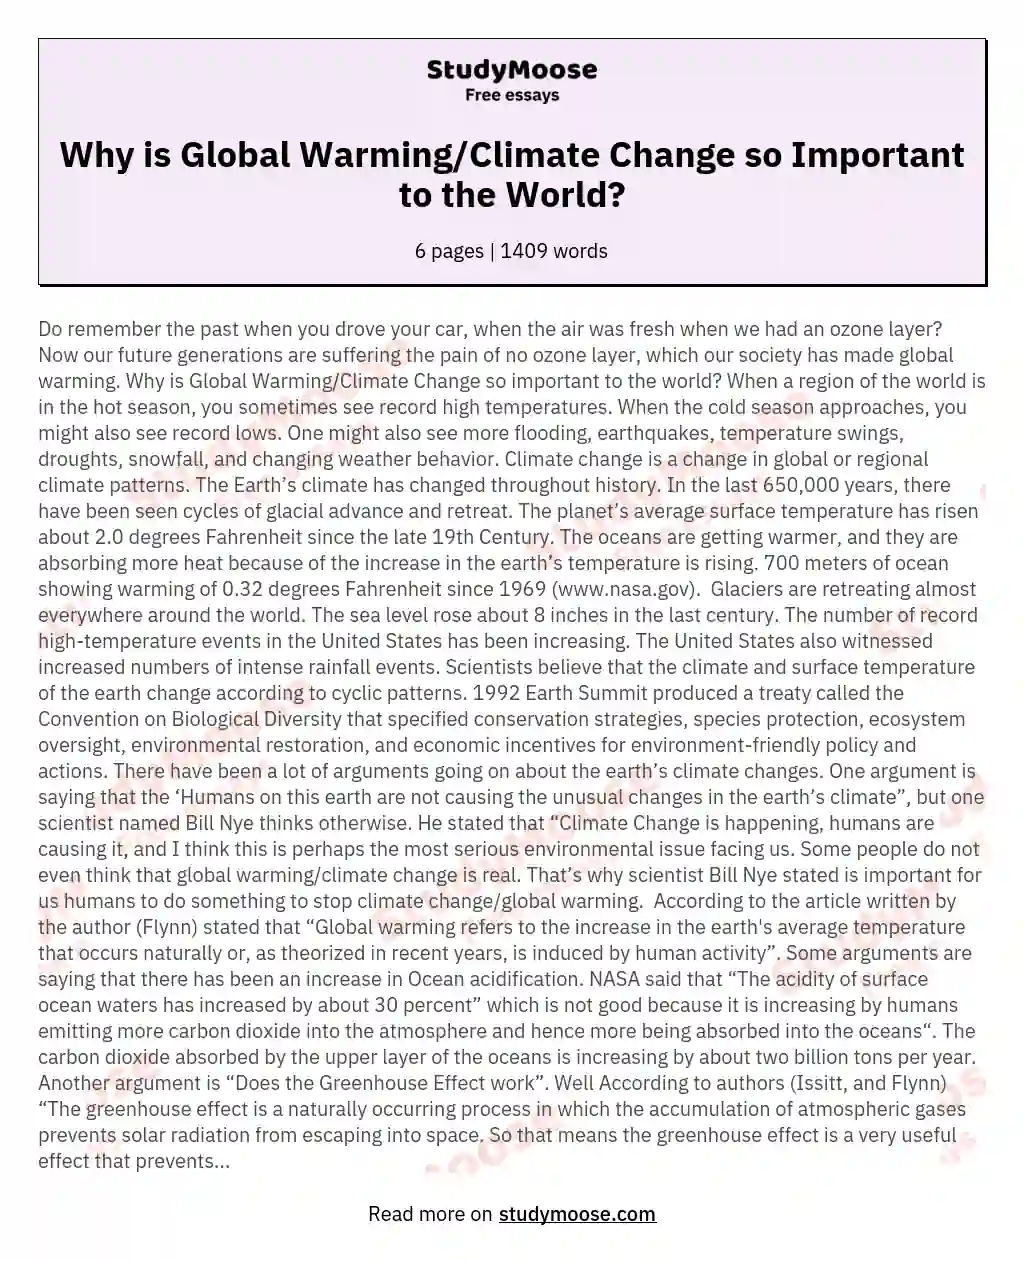 Why is Global Warming/Climate Change so Important to the World? essay